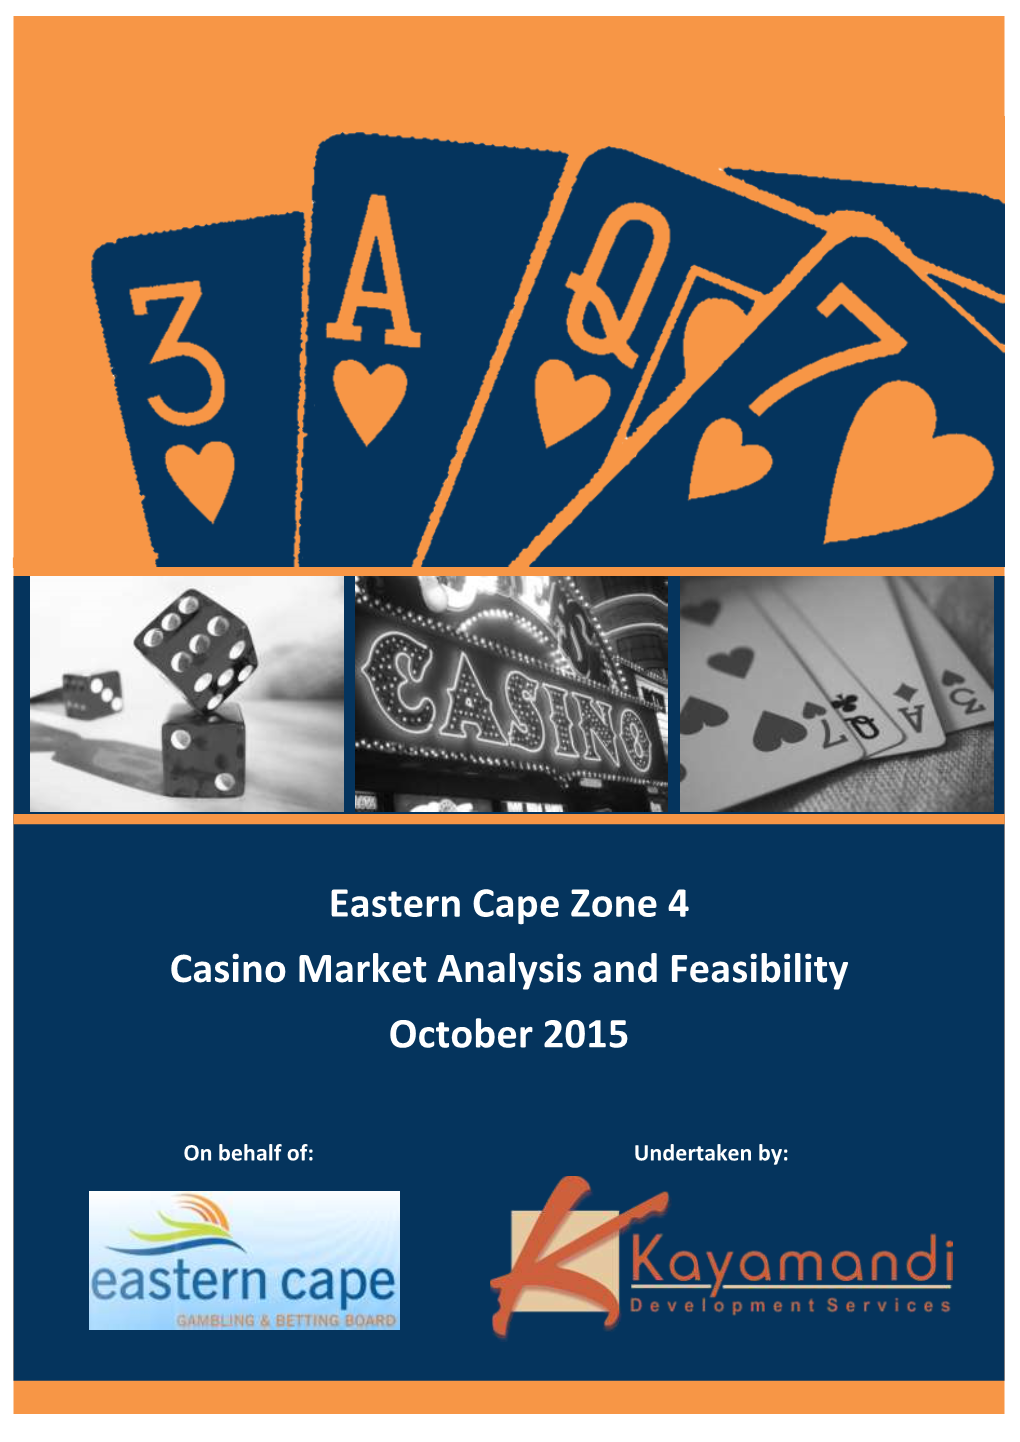 Eastern Cape Zone 4 Casino Market Analysis and Feasibility October 2015